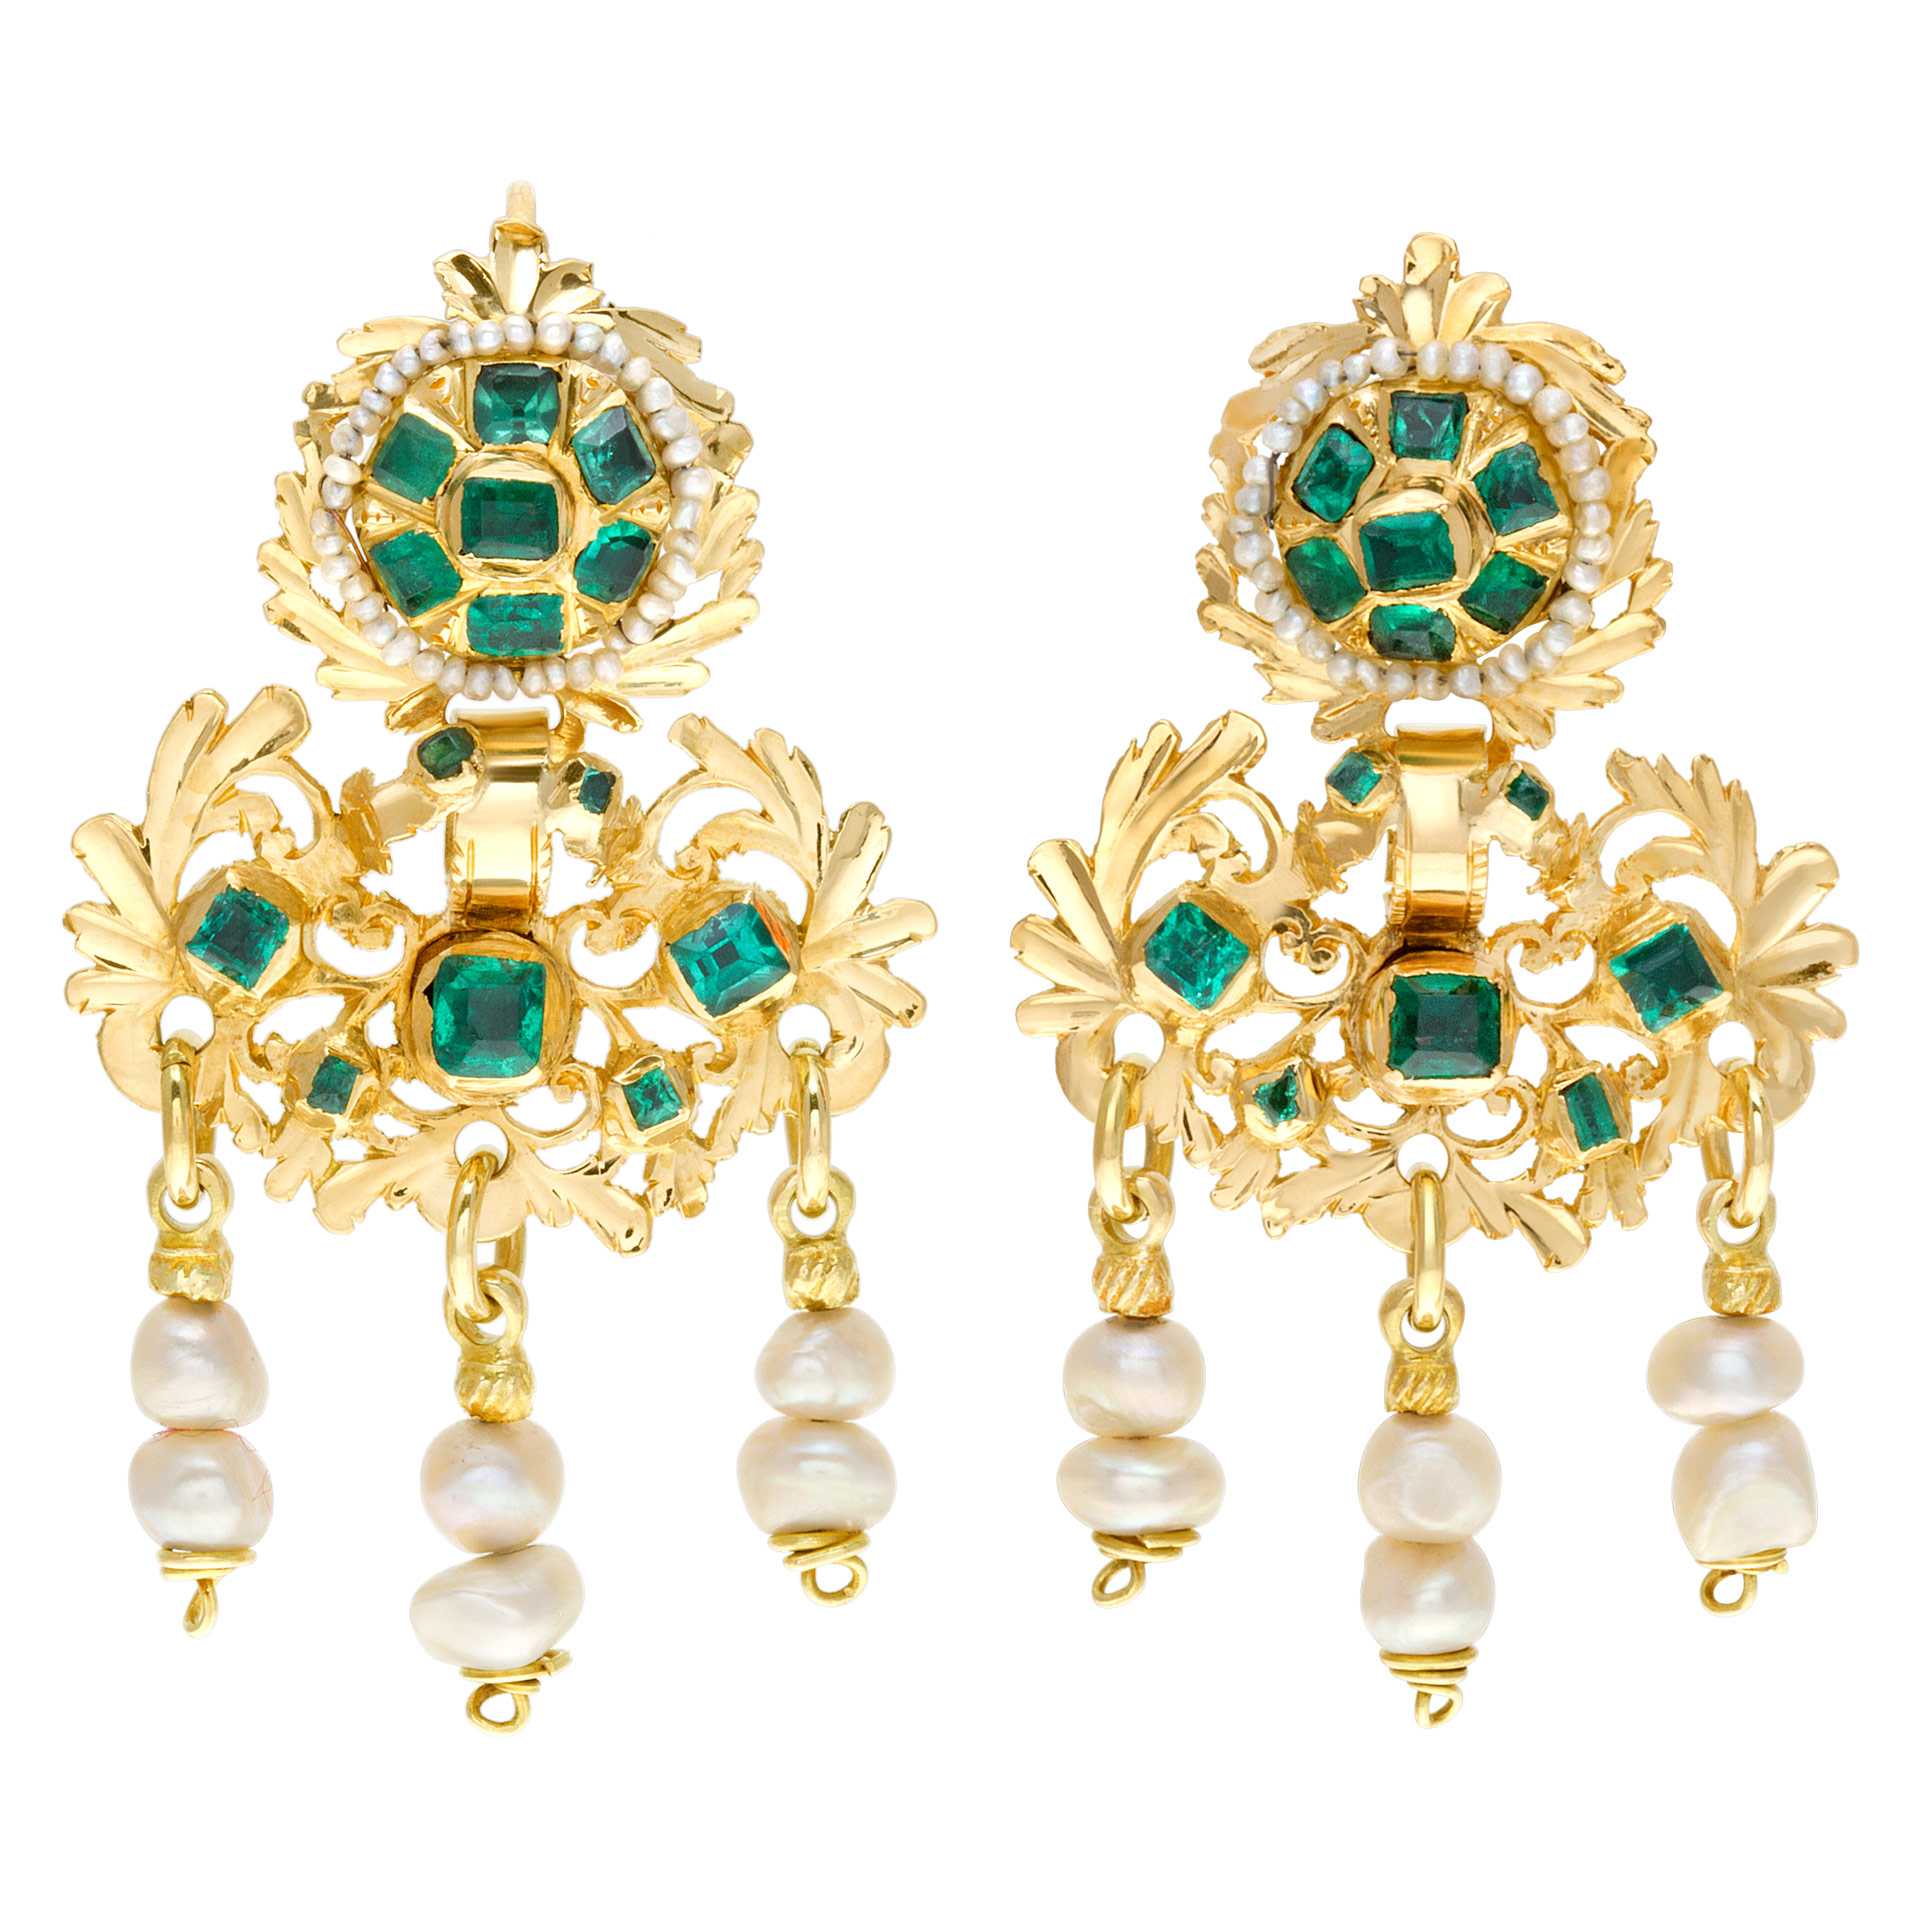 Dangling earrings with natural seed pearls and Columbian emeralds in 18k